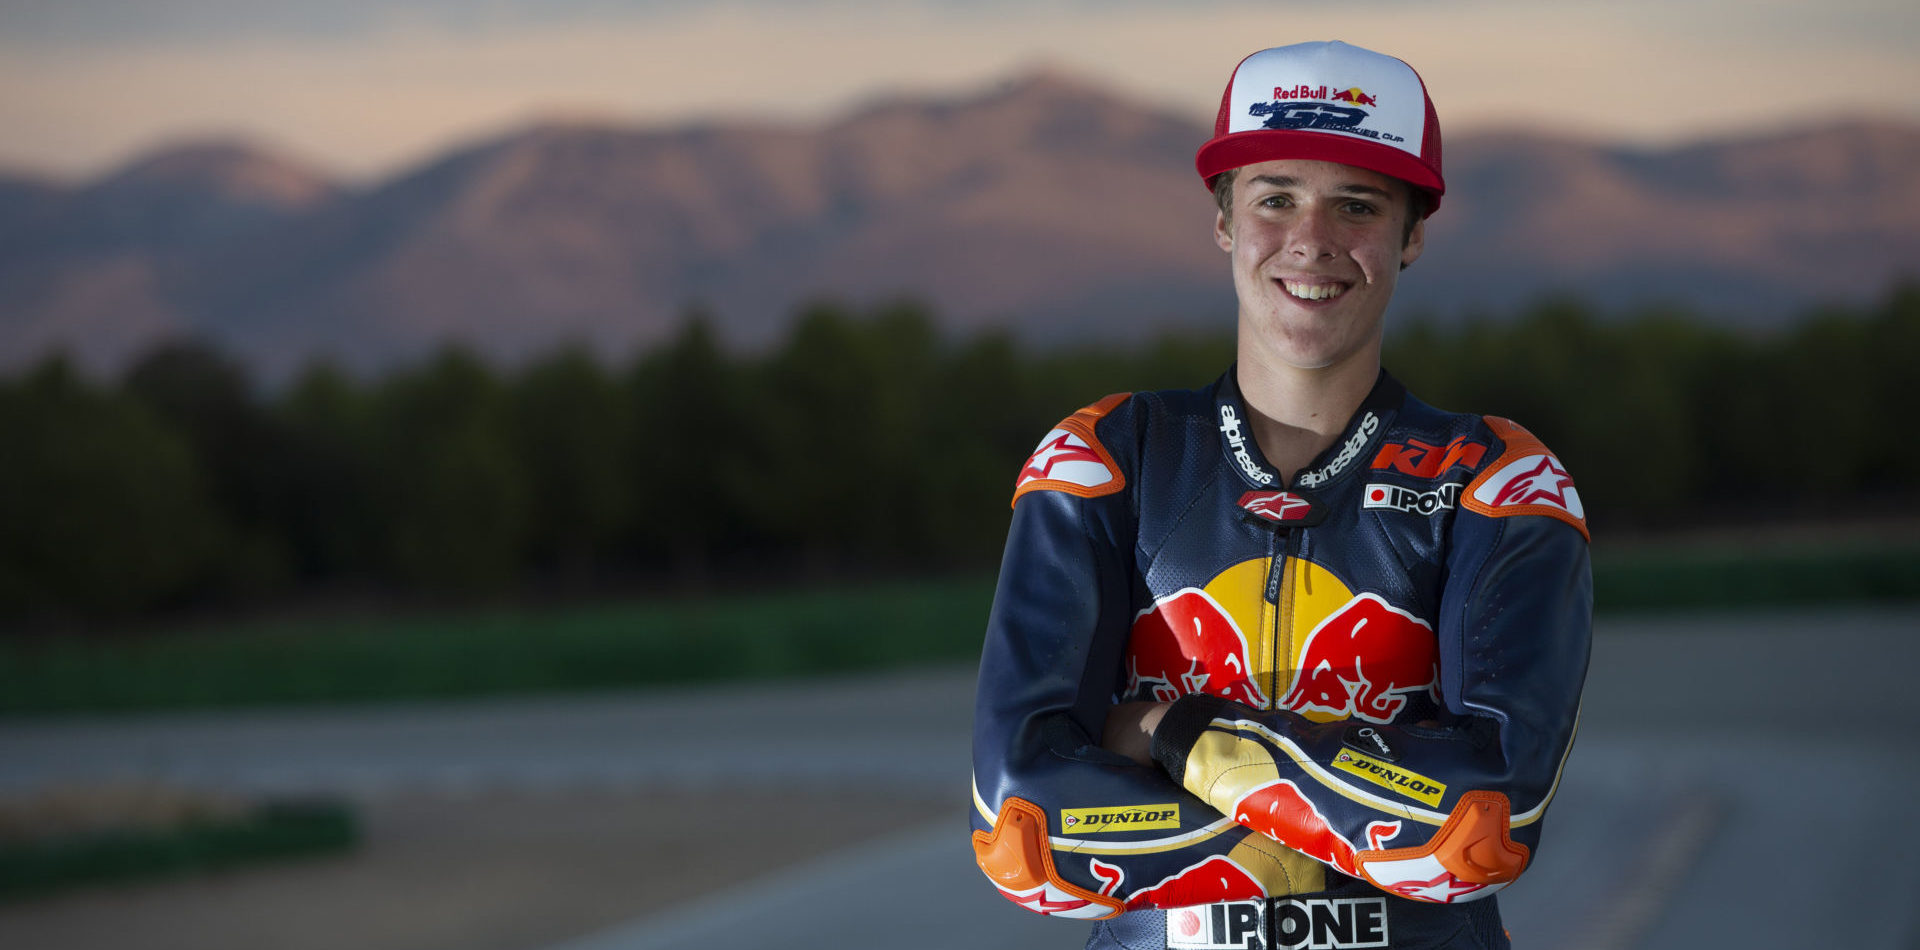 Rocco Landers, the 2019 MotoAmerica Junior Cup Champion and 2020 Red Bull MotoGP Rookie. Photo by GEPA Pictures, courtesy of Red Bull.